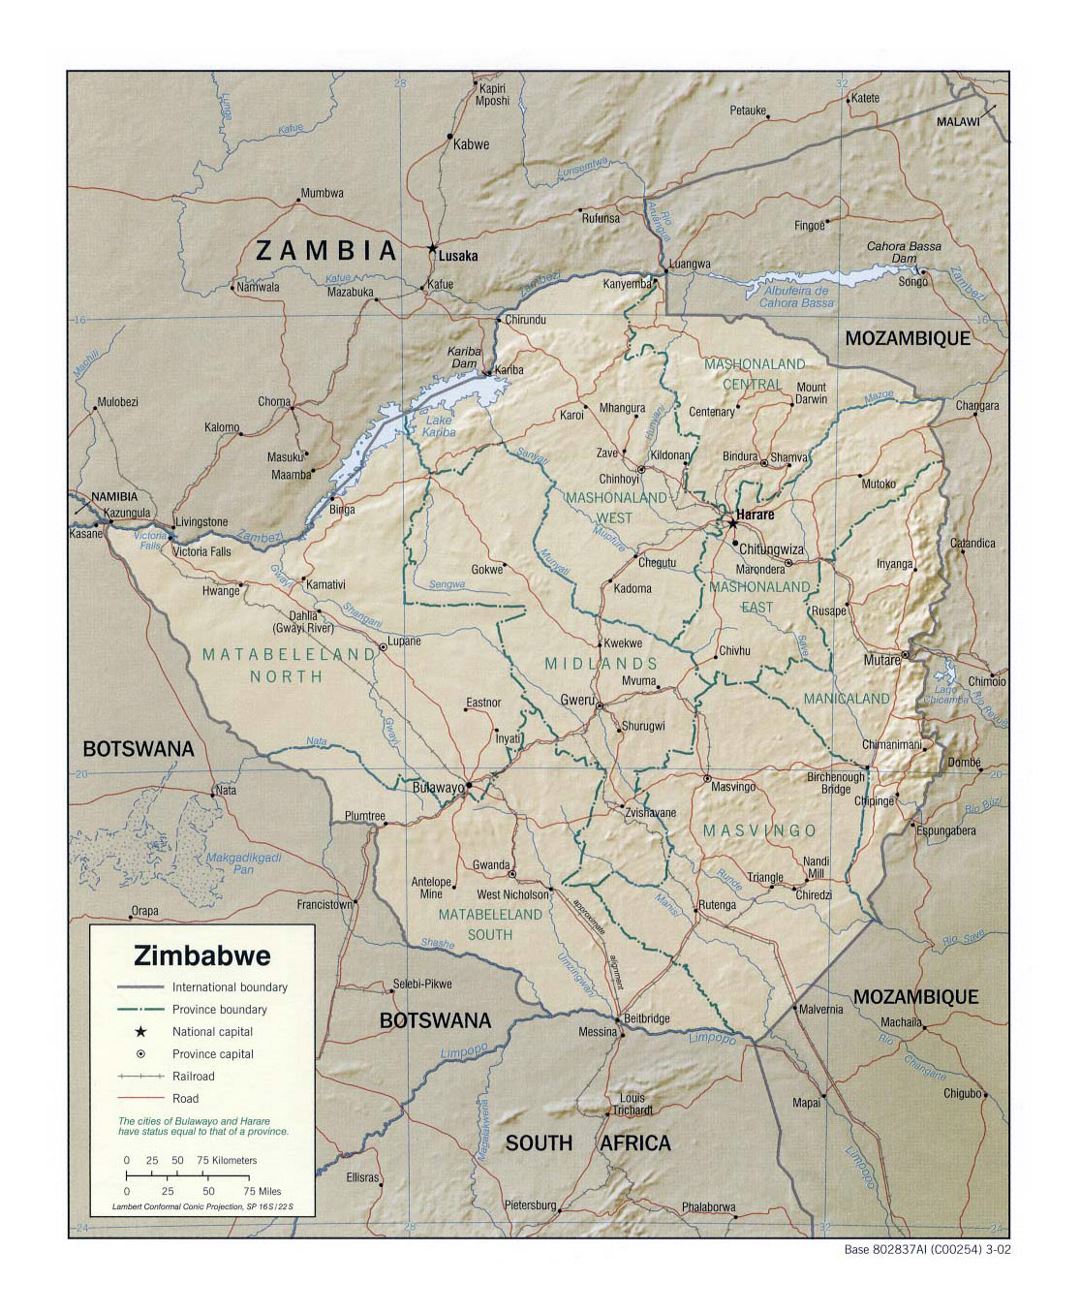 Detailed political and administrative map of Zimbabwe with relief, roads, railroads and major cities - 2002